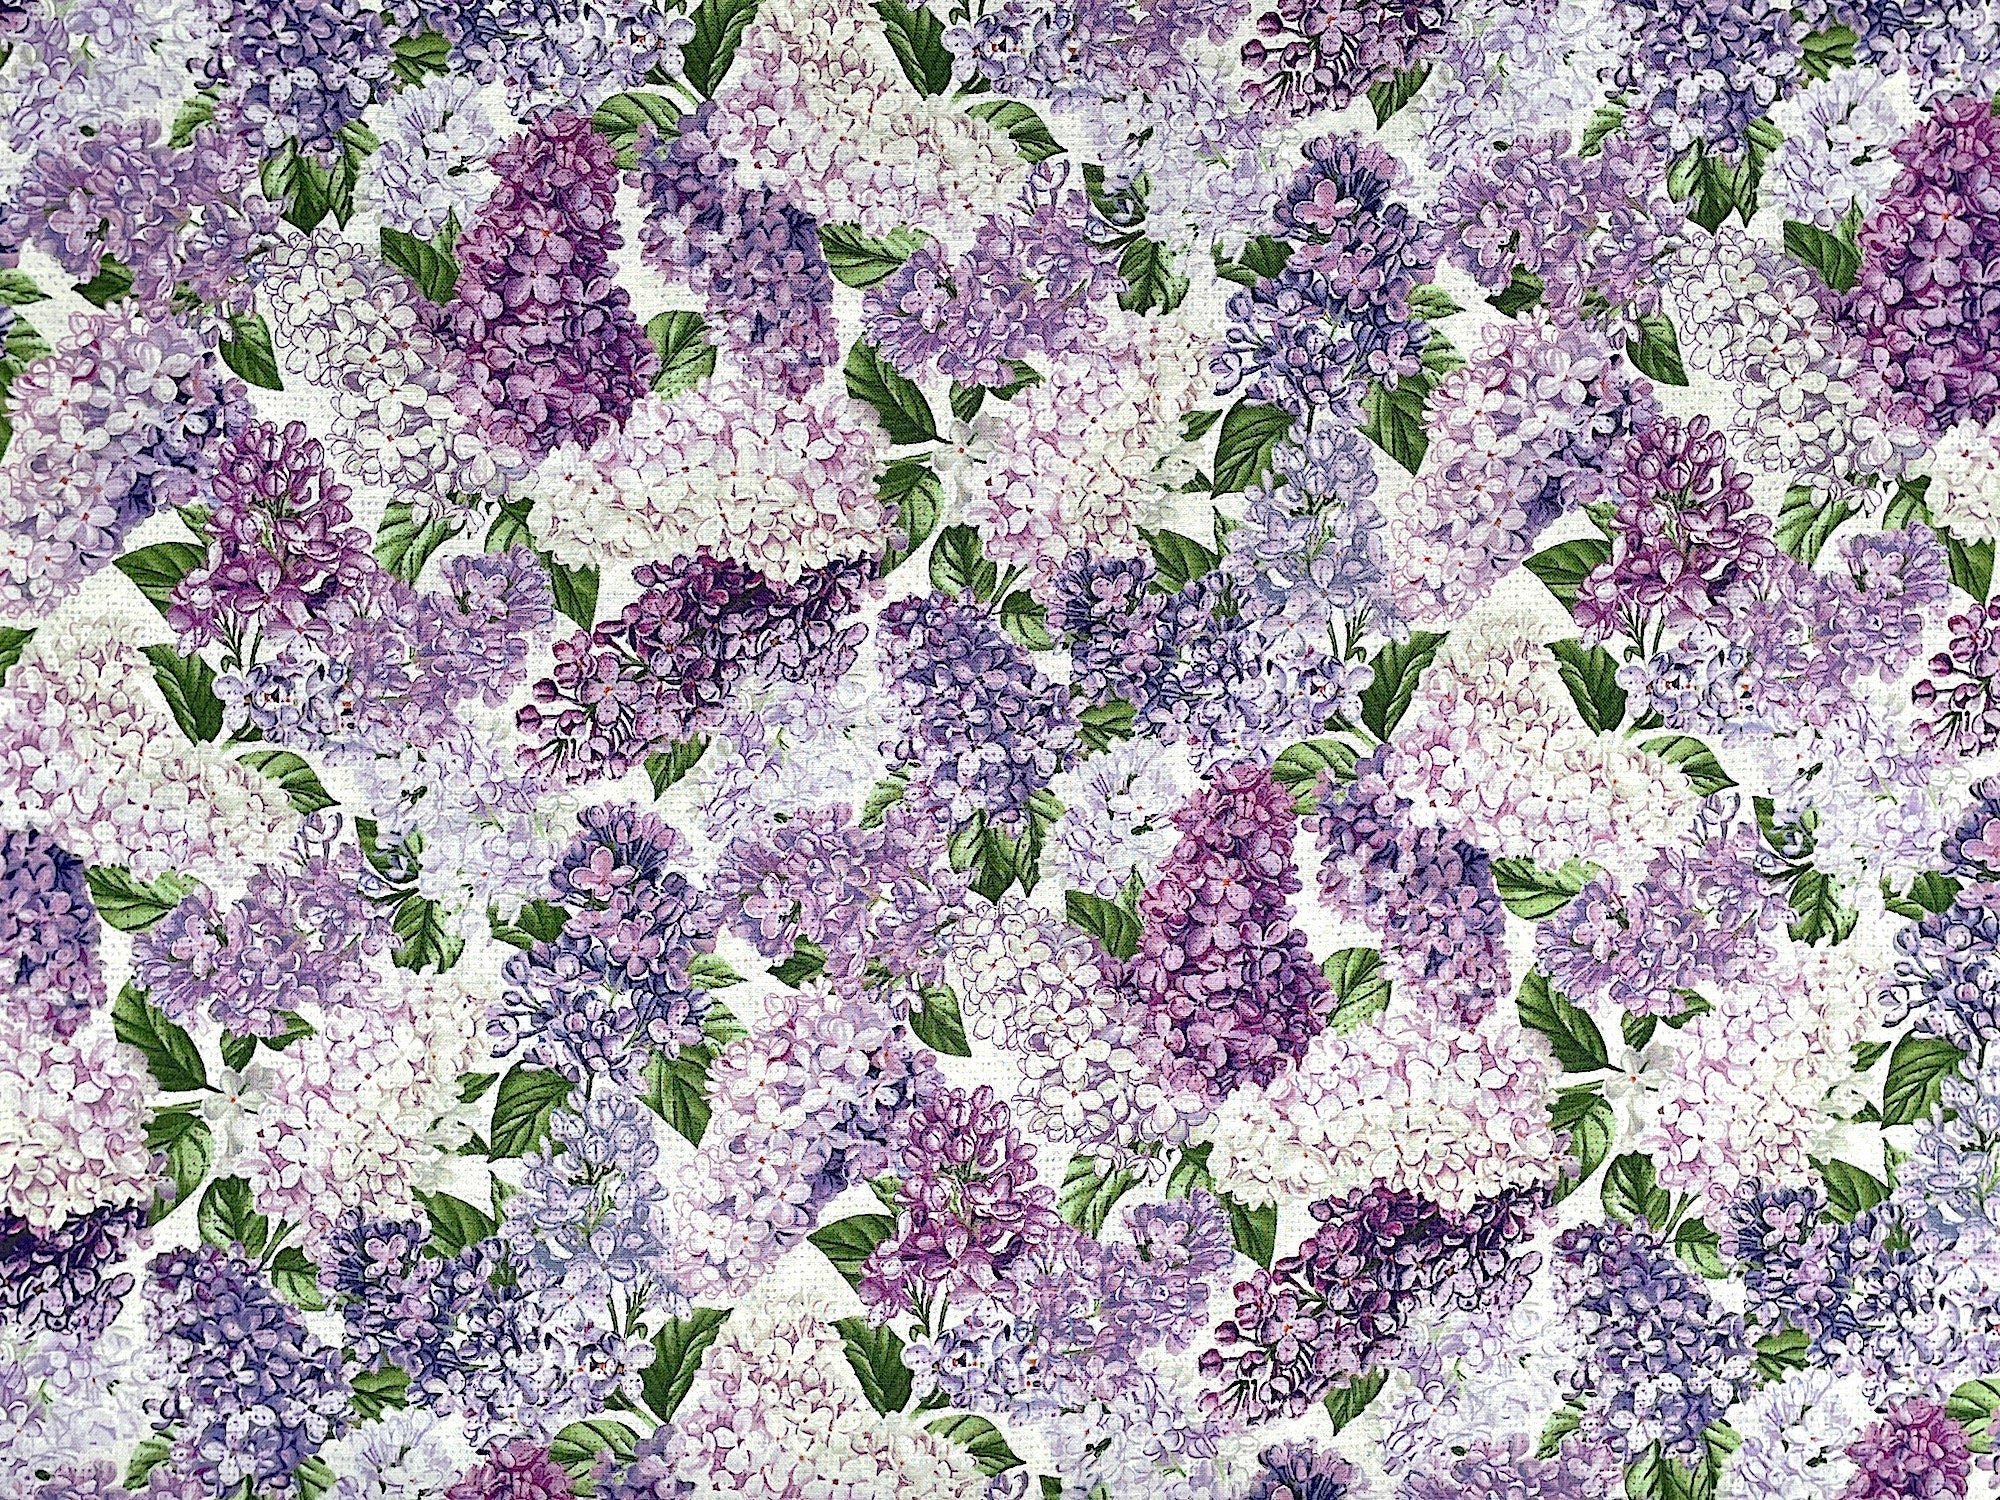 Cotton fabric covered with white, purple and lavender lilacs.